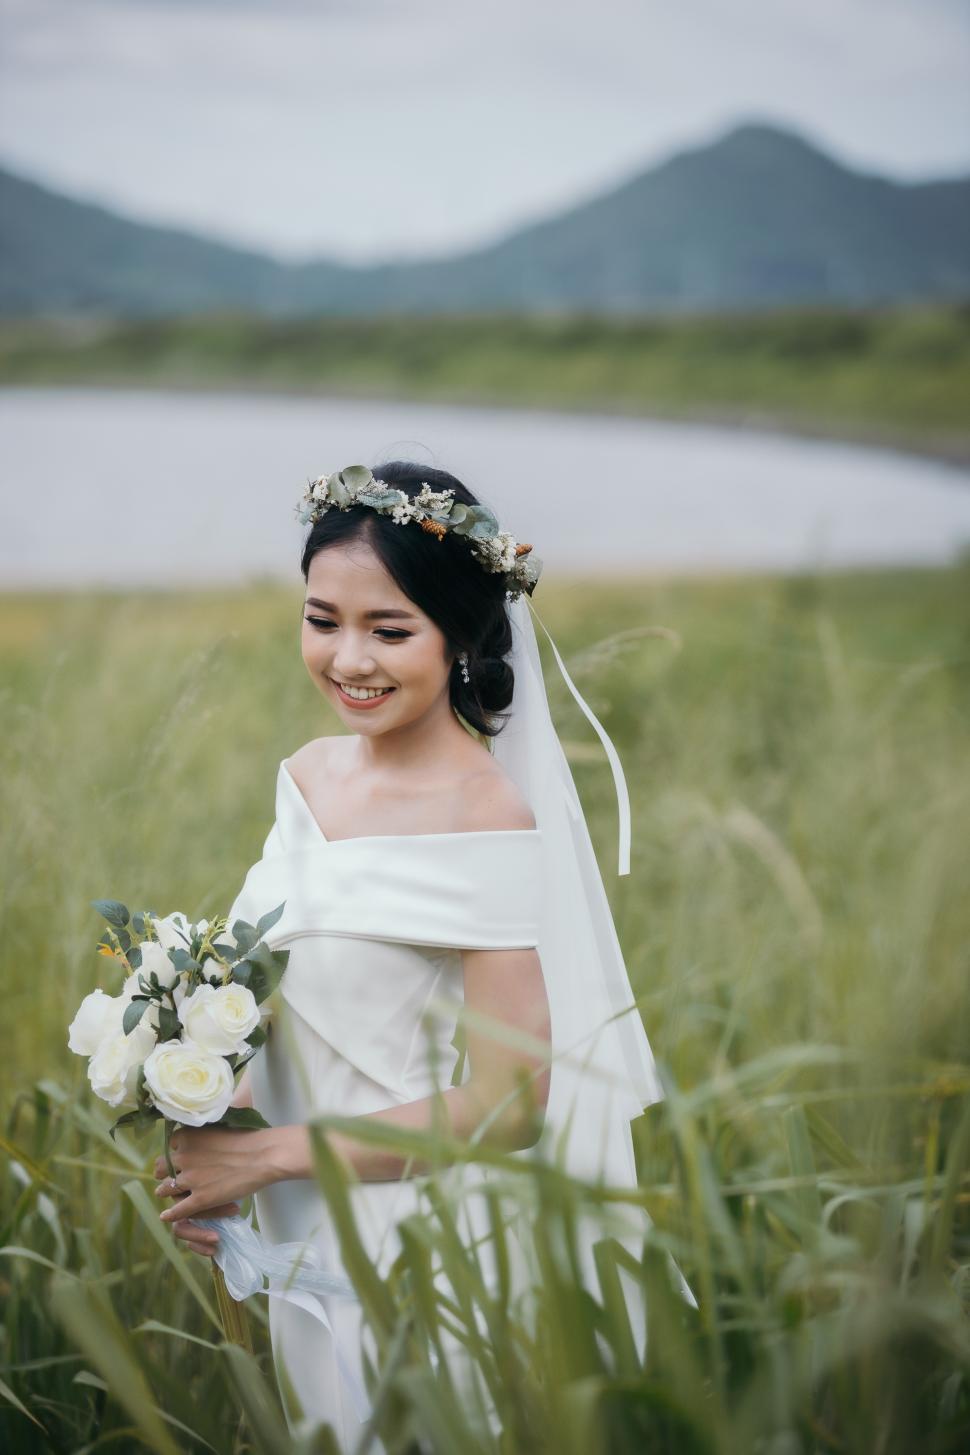 Free Image of Bride in wedding dress holding a bouquet 